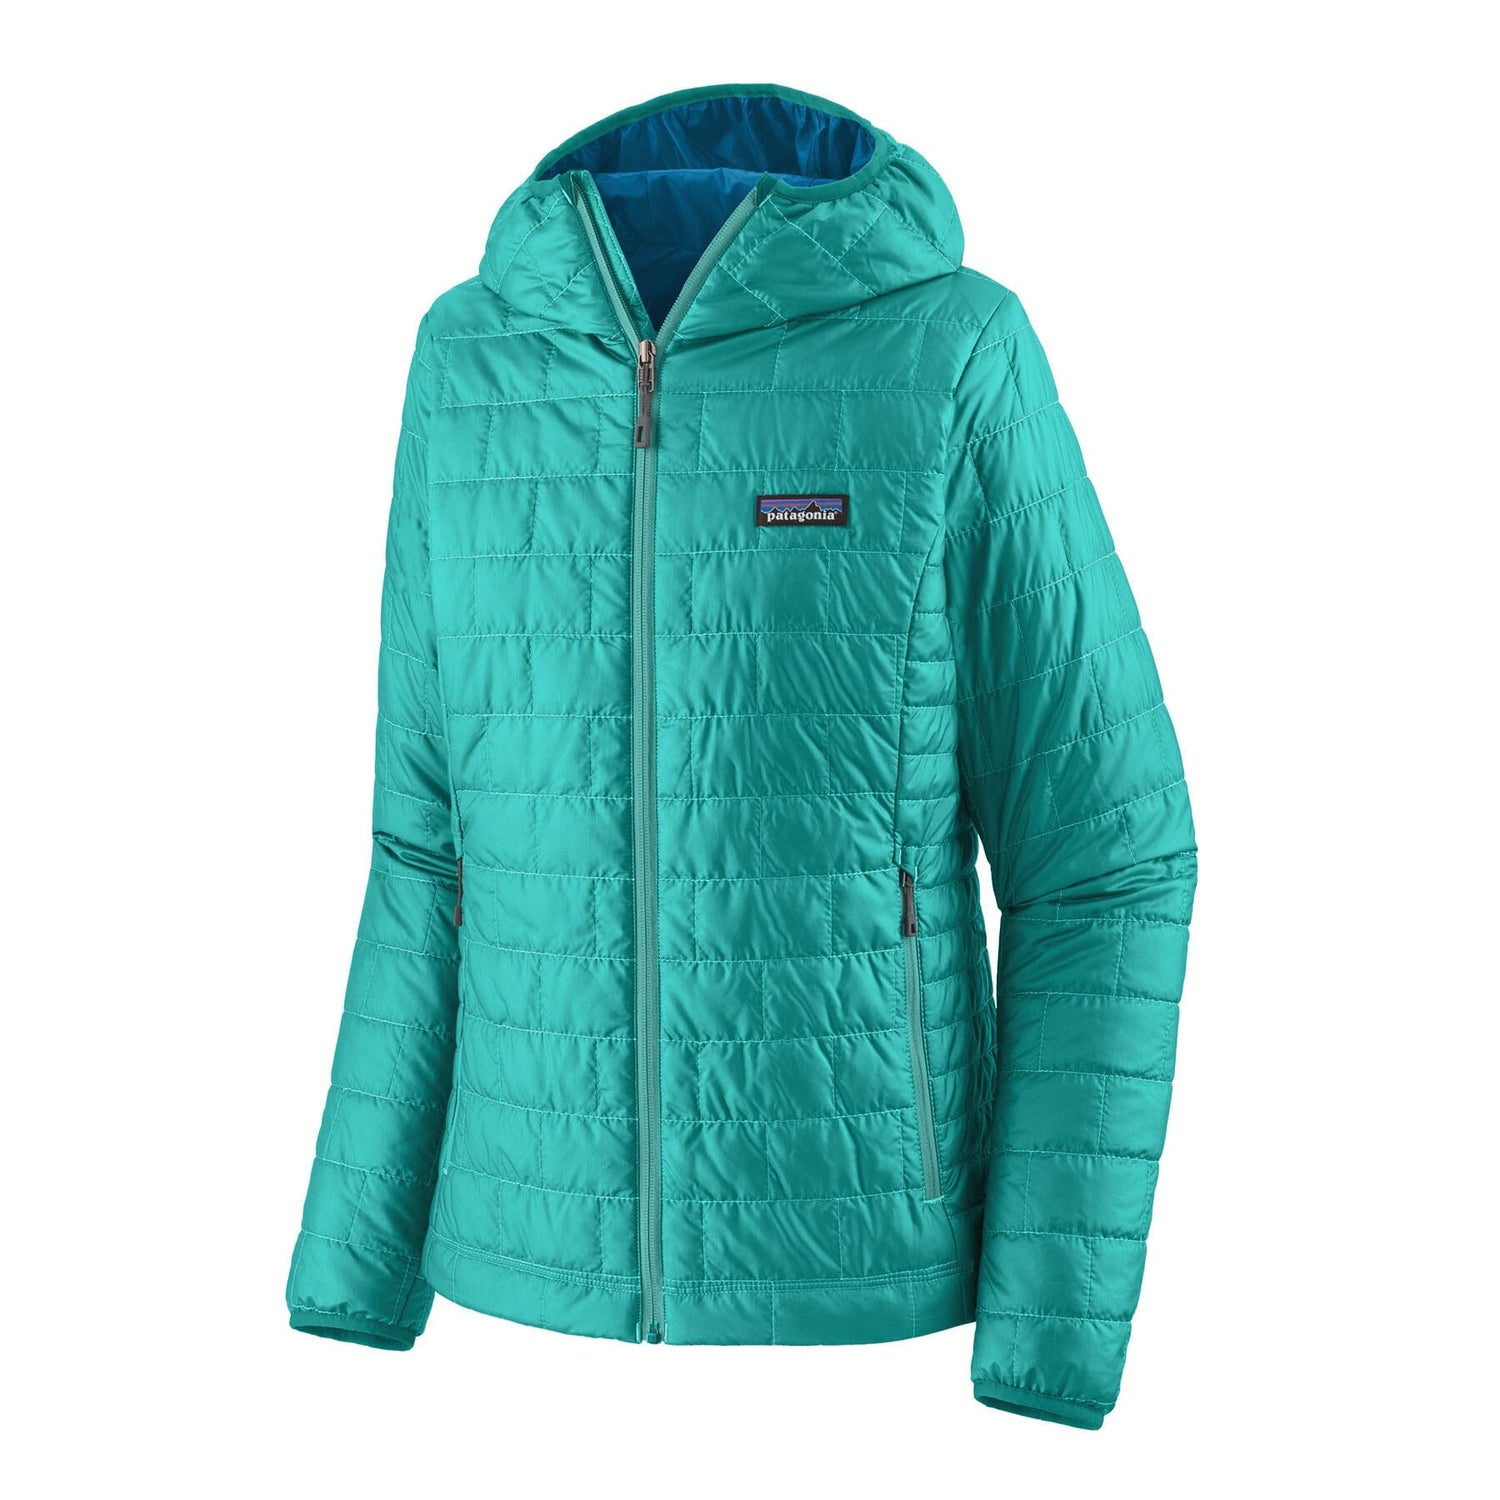 Patagonia W's Nano Puff® Hoody - Recycled Polyester Subtidal Blue Jacket